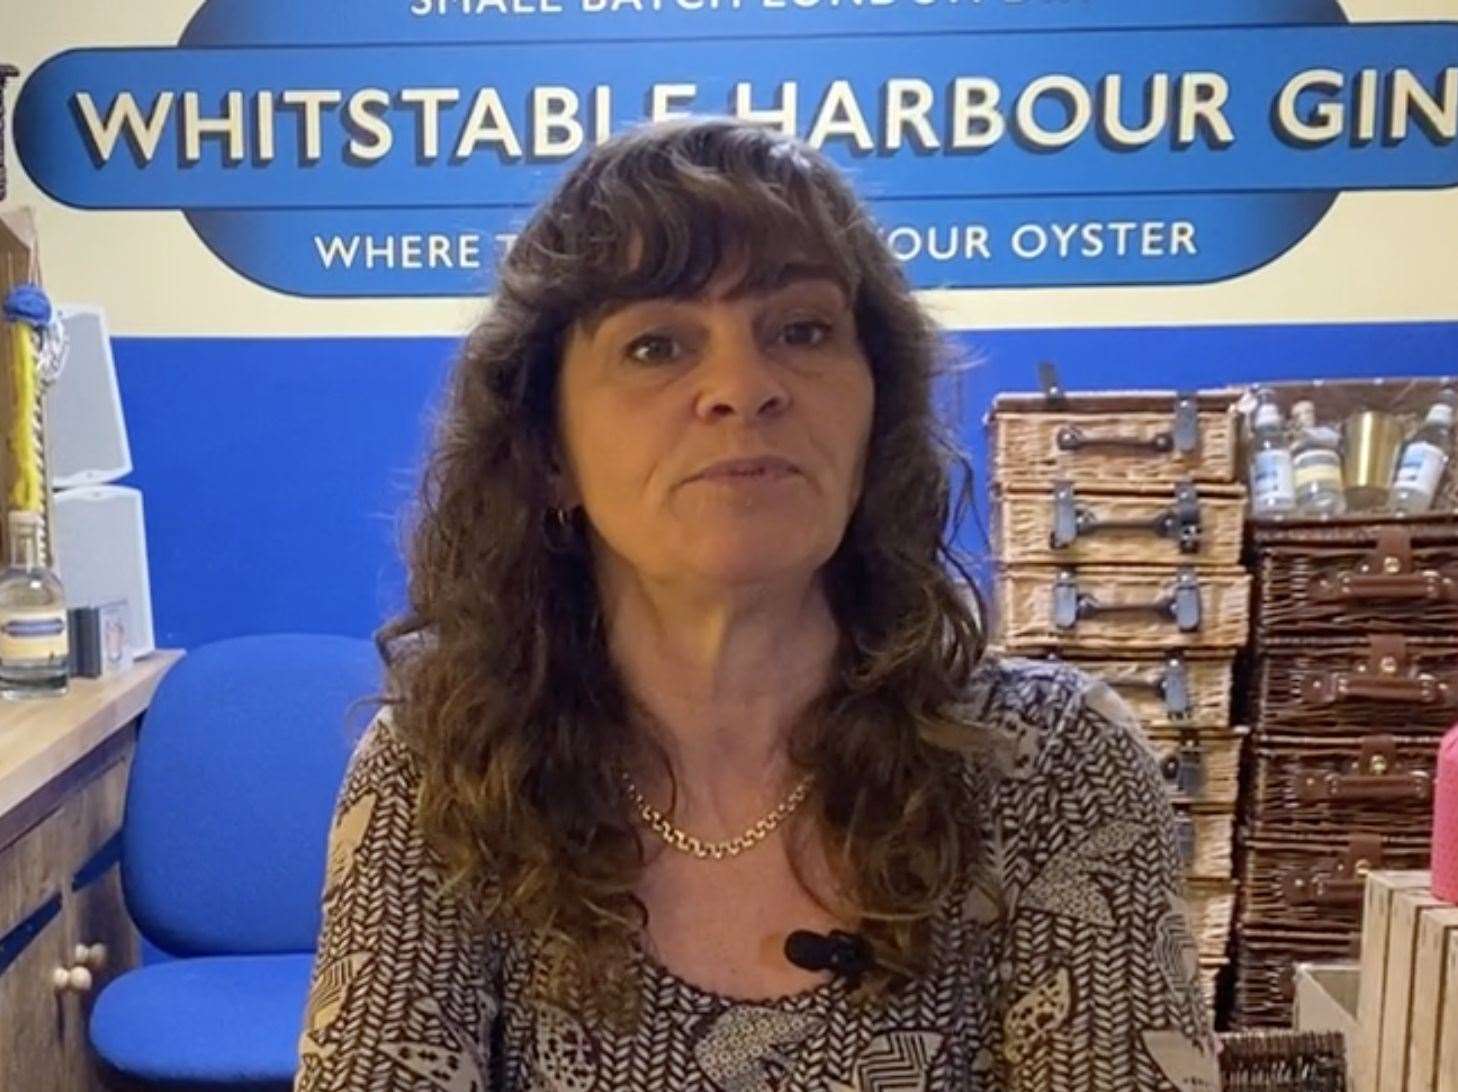 Justine Setterfield, who owns and operates the Whitstable Harbour Gin store, worries the pricier rates will deter potential customers from visiting her shop in South Quay Sheds